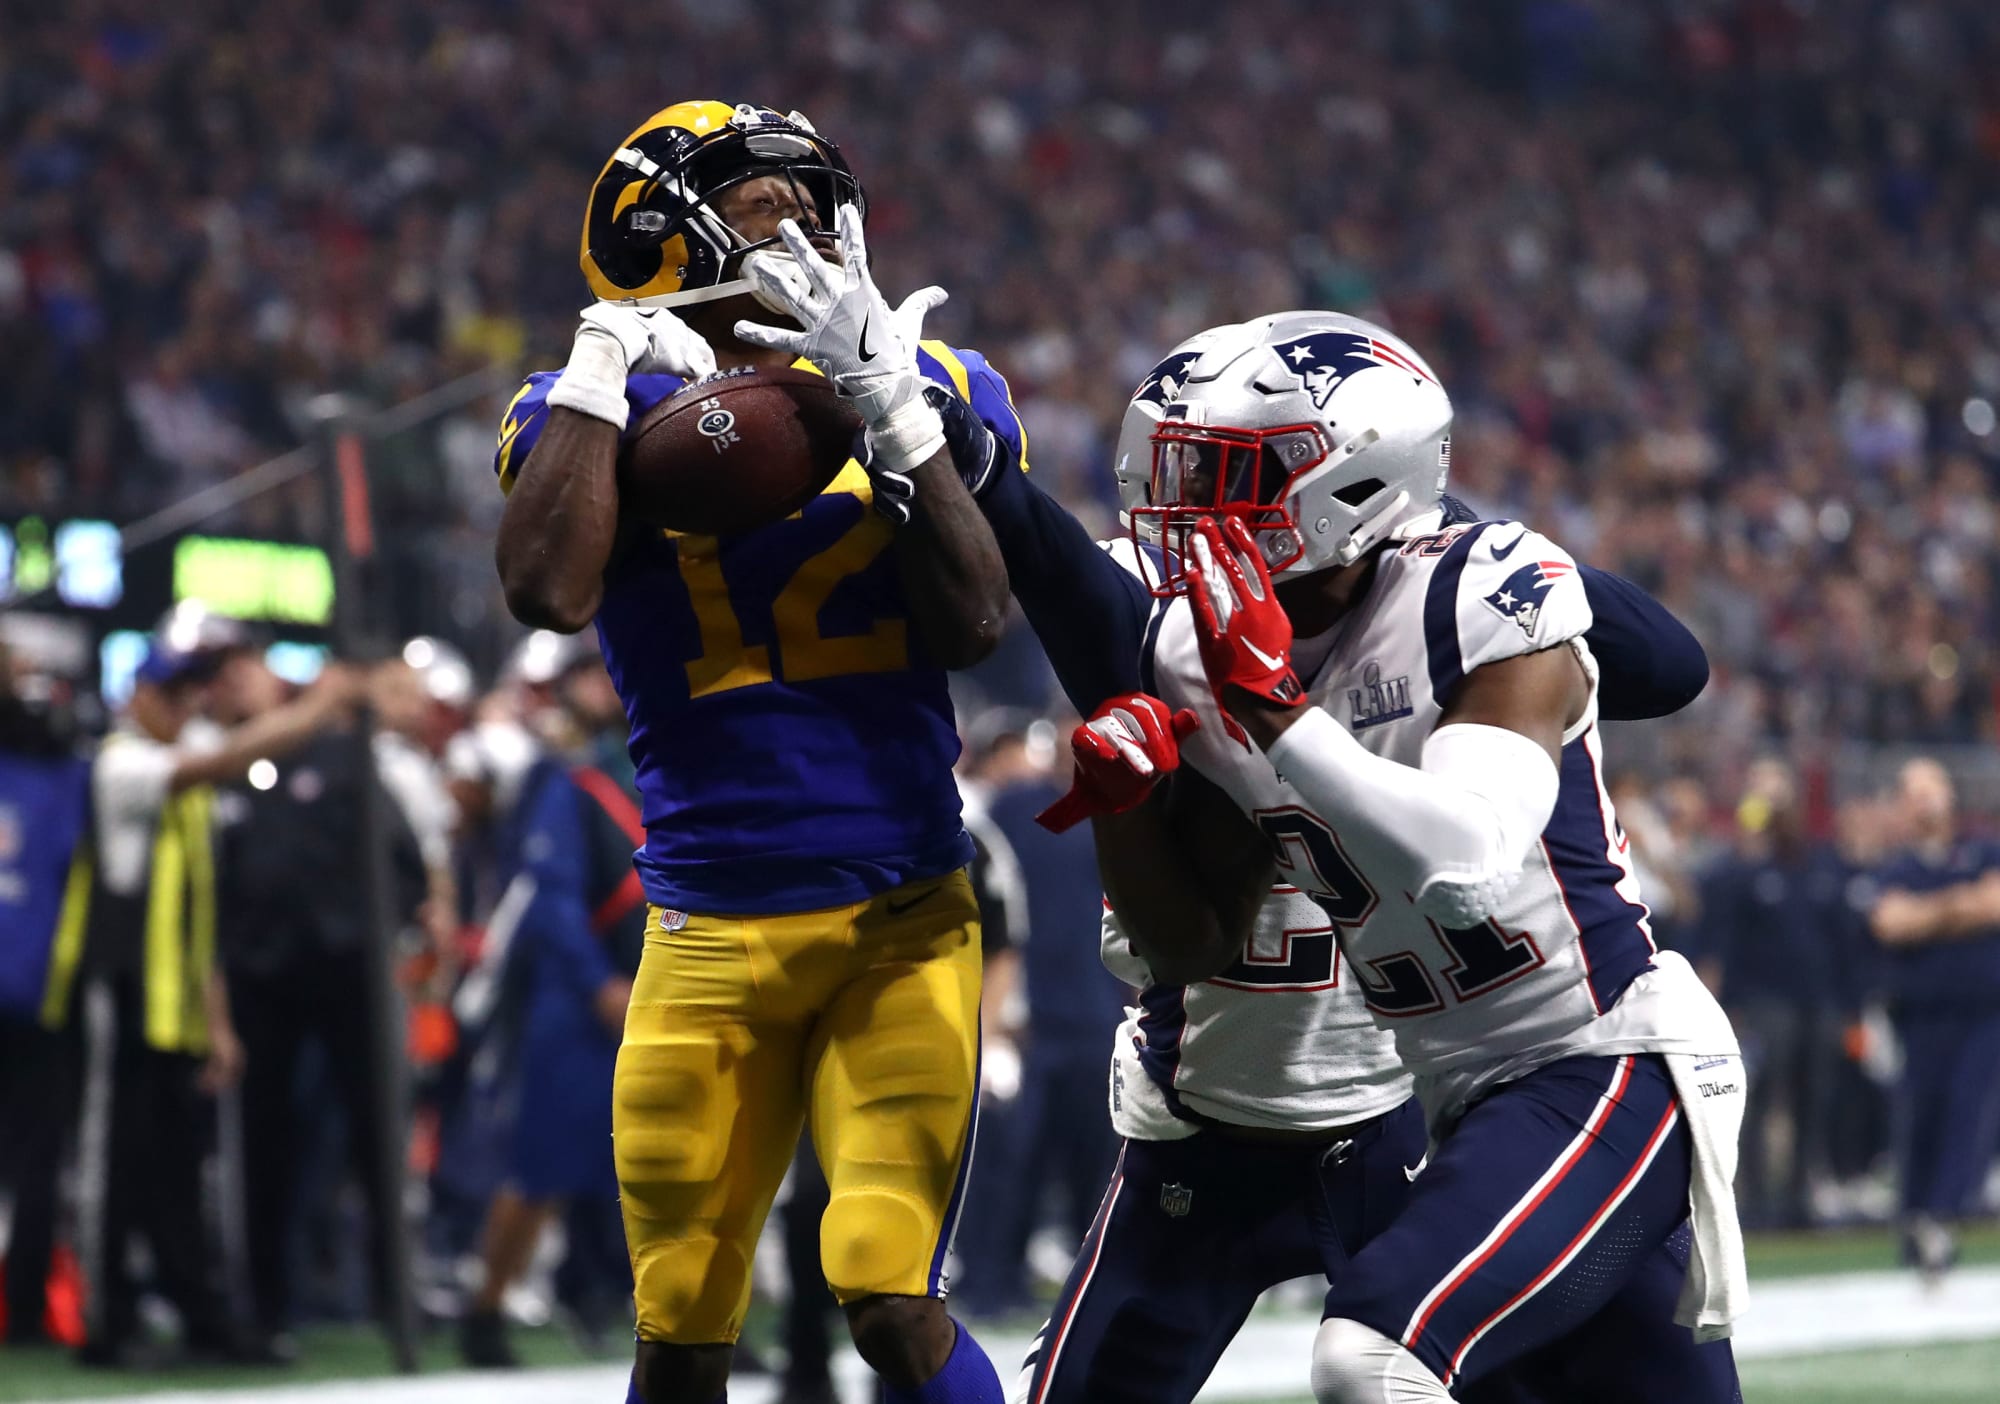 Los Angeles Rams: Super Bowl 53 was doomed from start